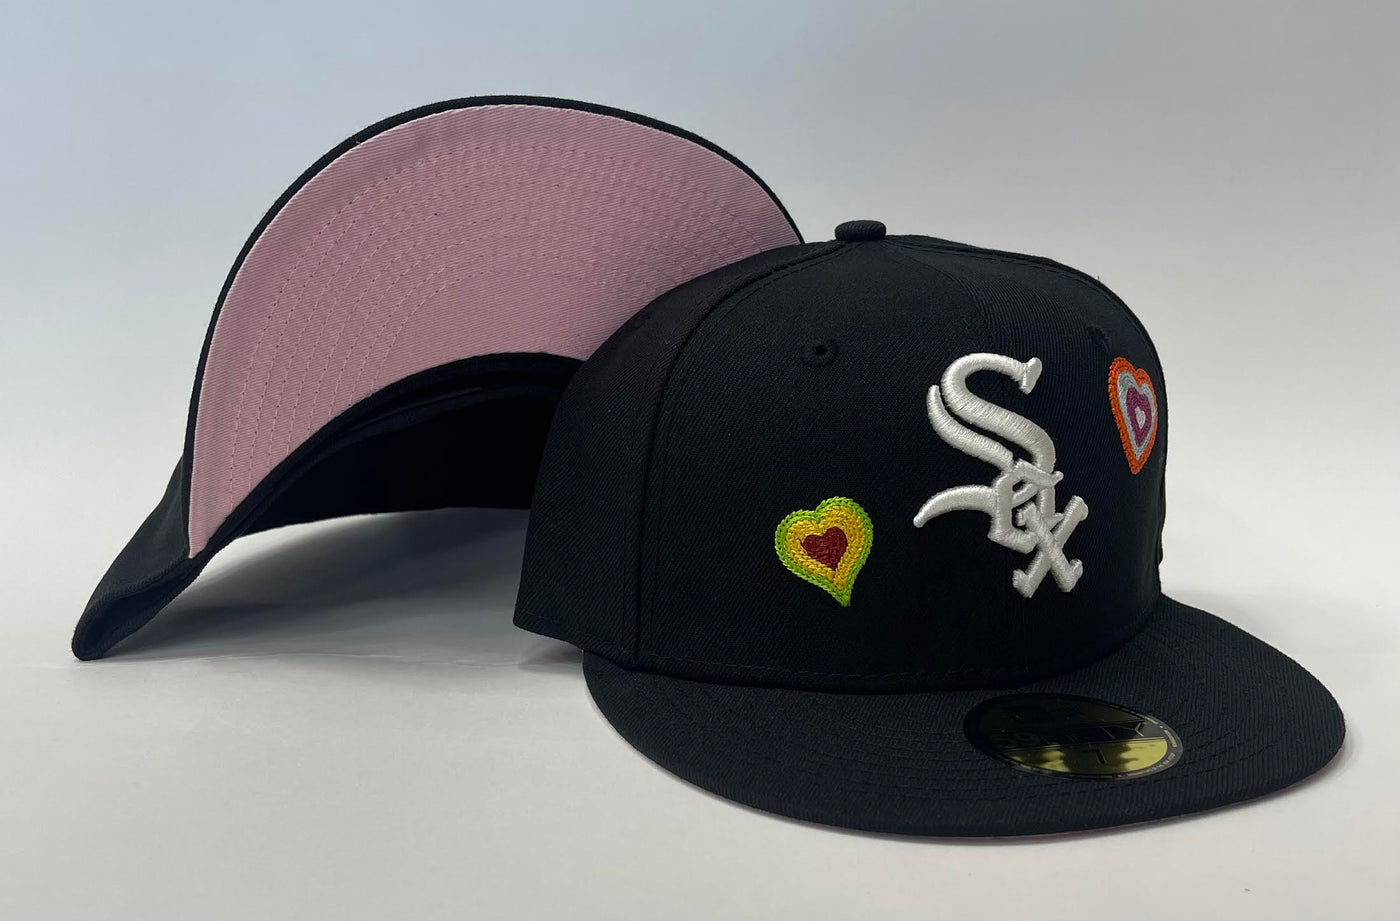 Men's New Era Royal Chicago White Sox 59FIFTY Fitted Hat